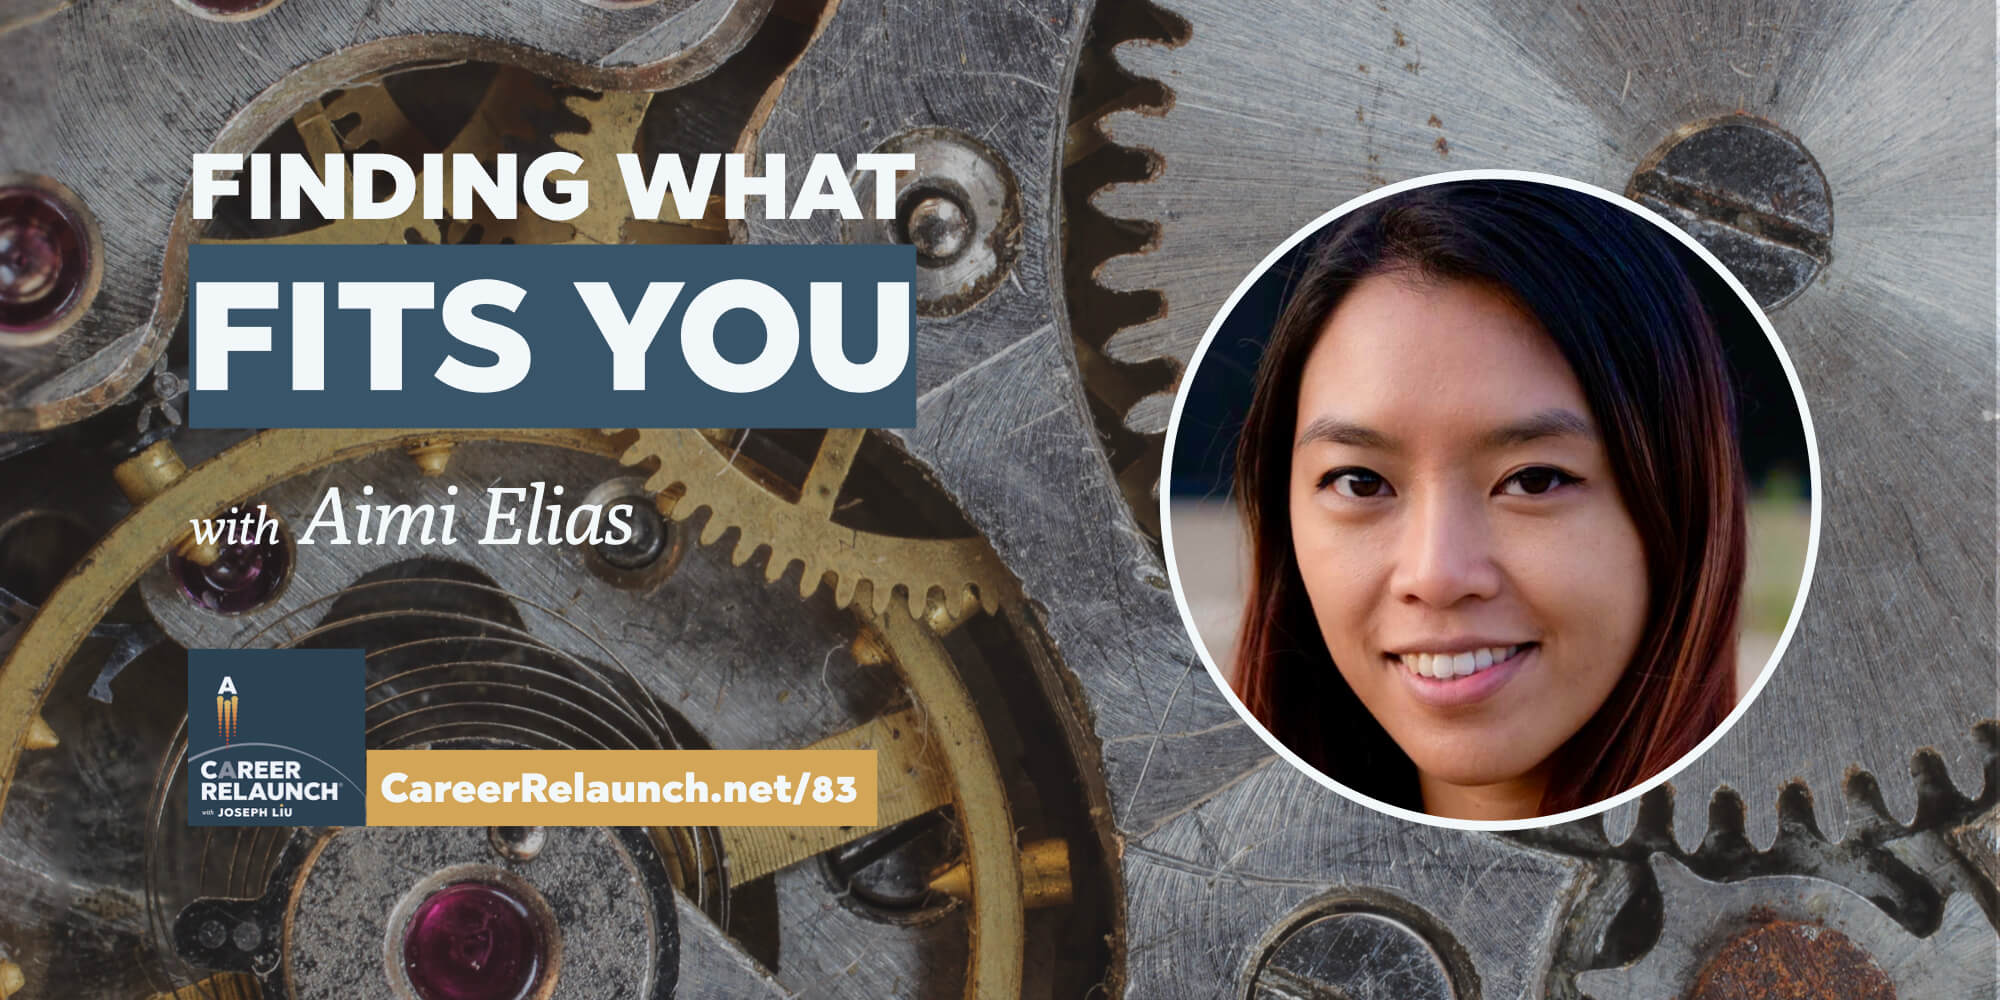 Finding What Fits You with Aimi Elias- Career Relaunch podcast episode 83